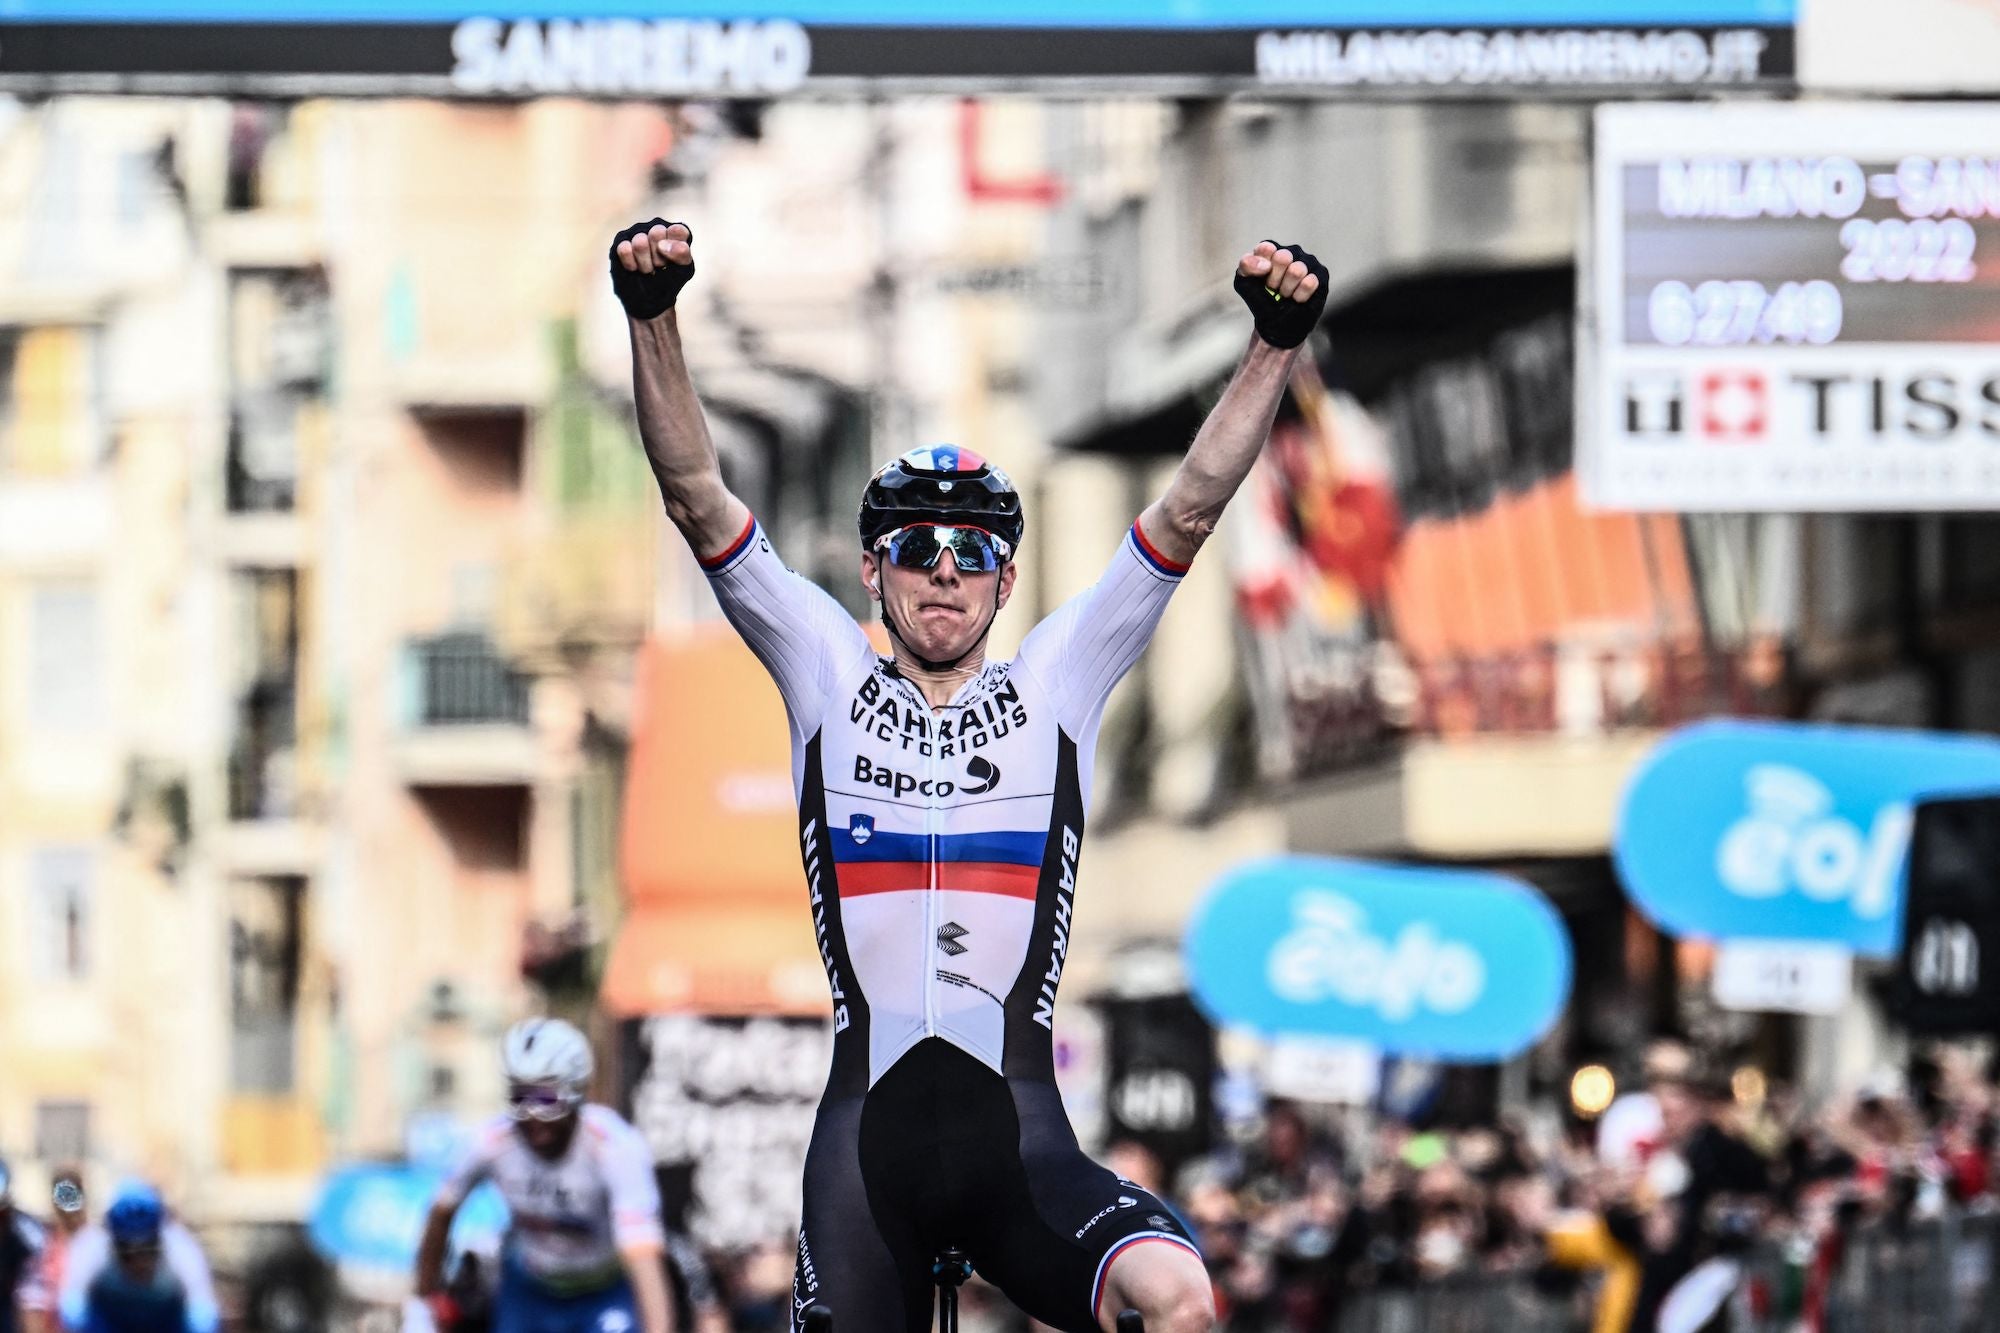 Milan-San Remo preview Favorites, course details, and who will rule the Poggio